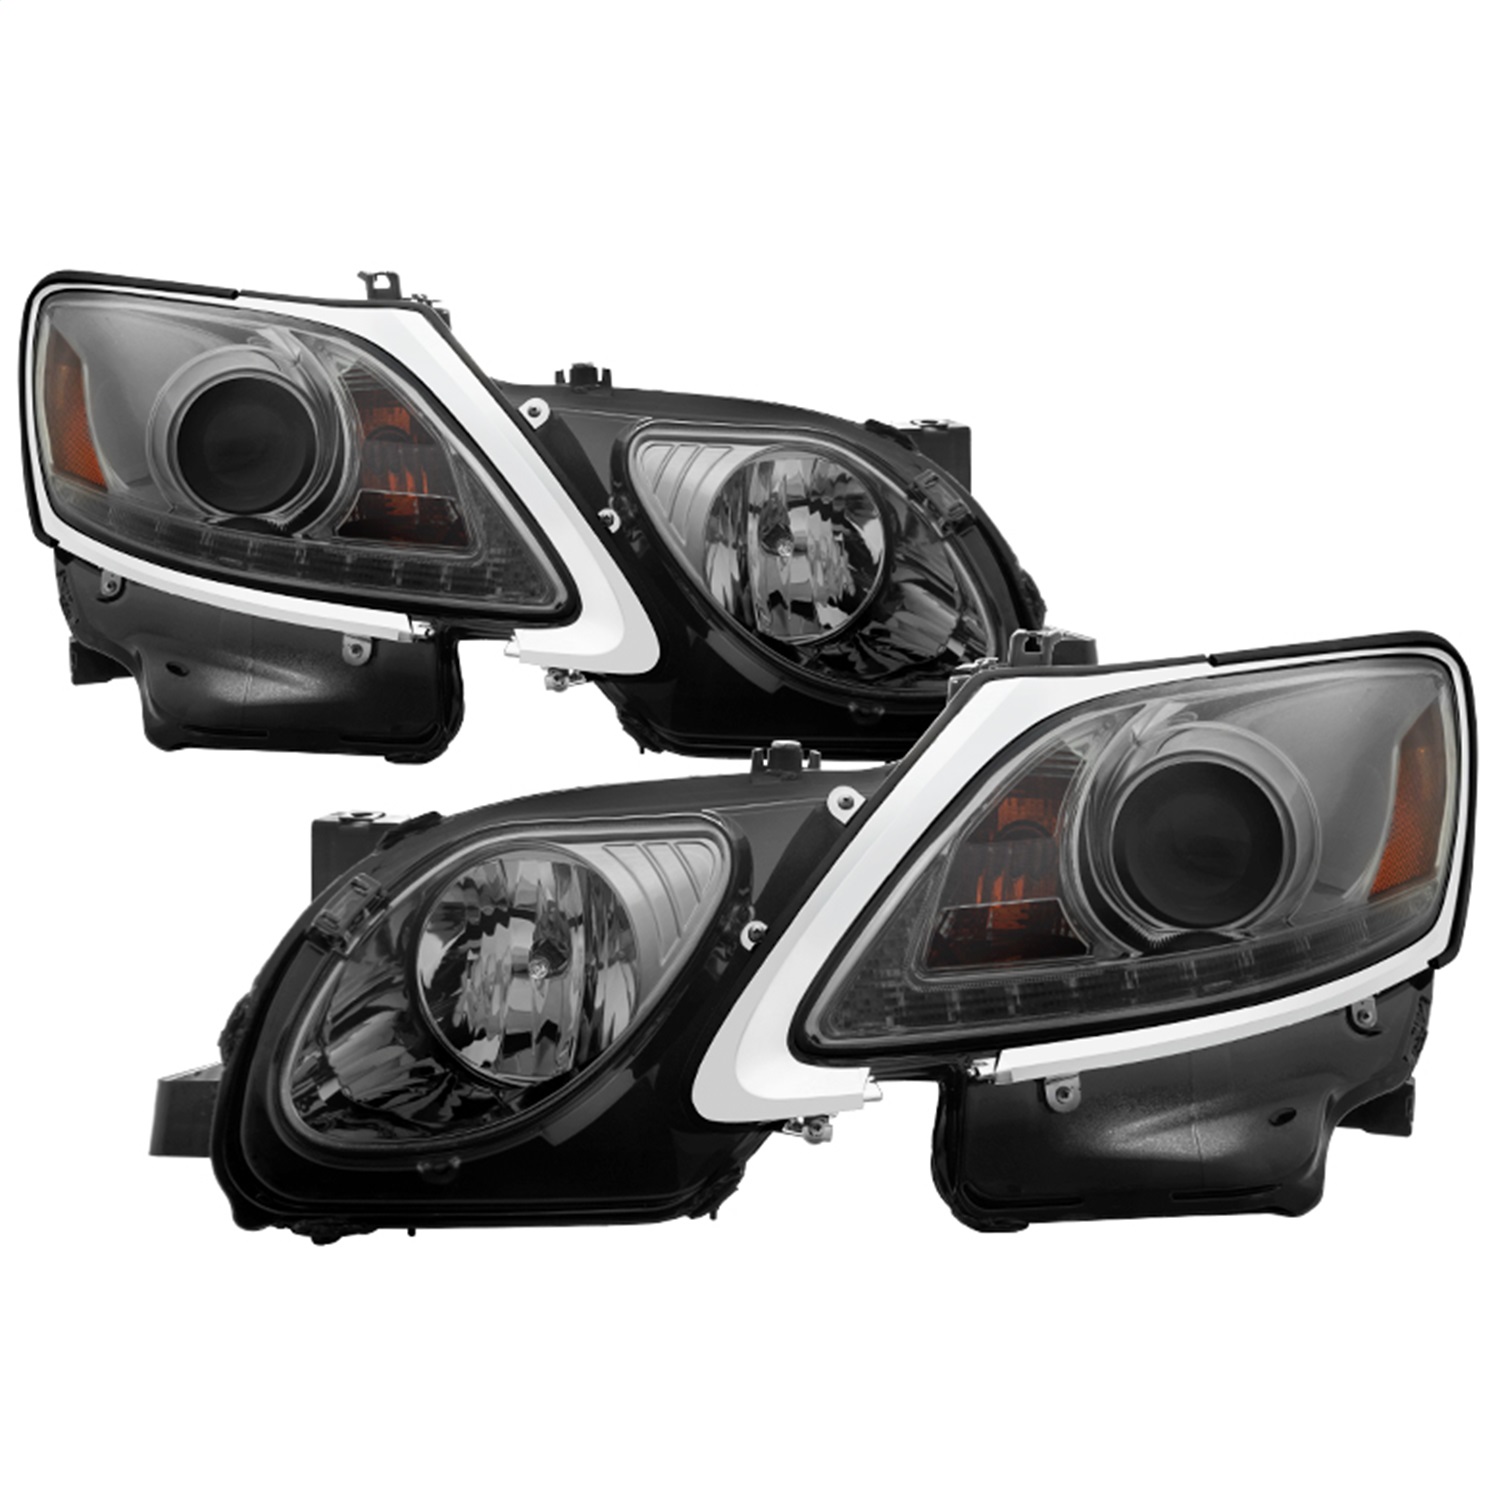 Spyder Auto 5082817 DRL LED Projector Headlights Fits GS300 GS350 GS450h GS460